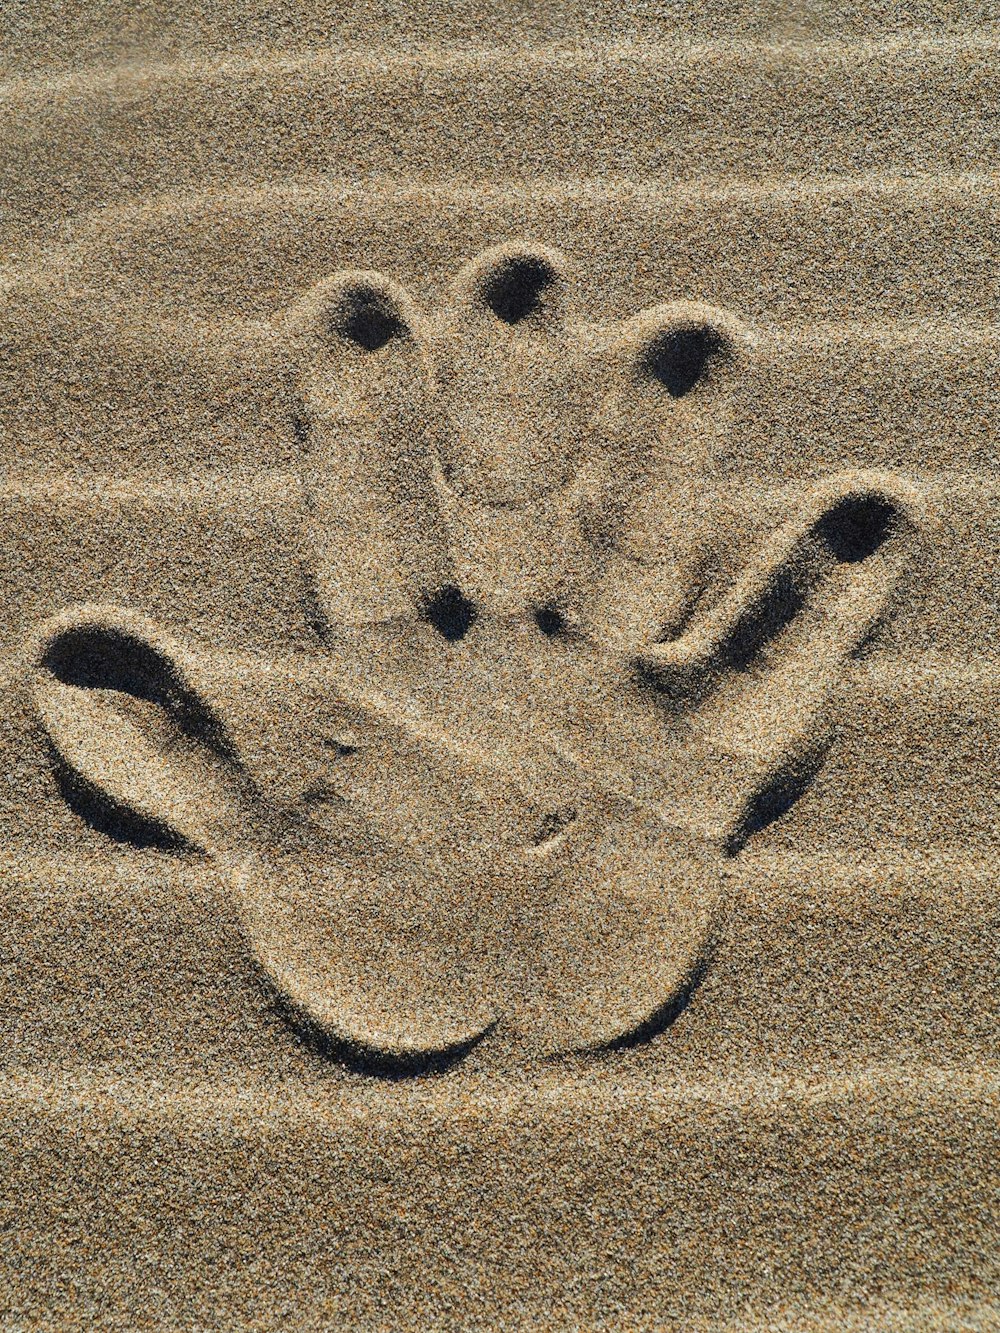 a paw print in the sand on a beach